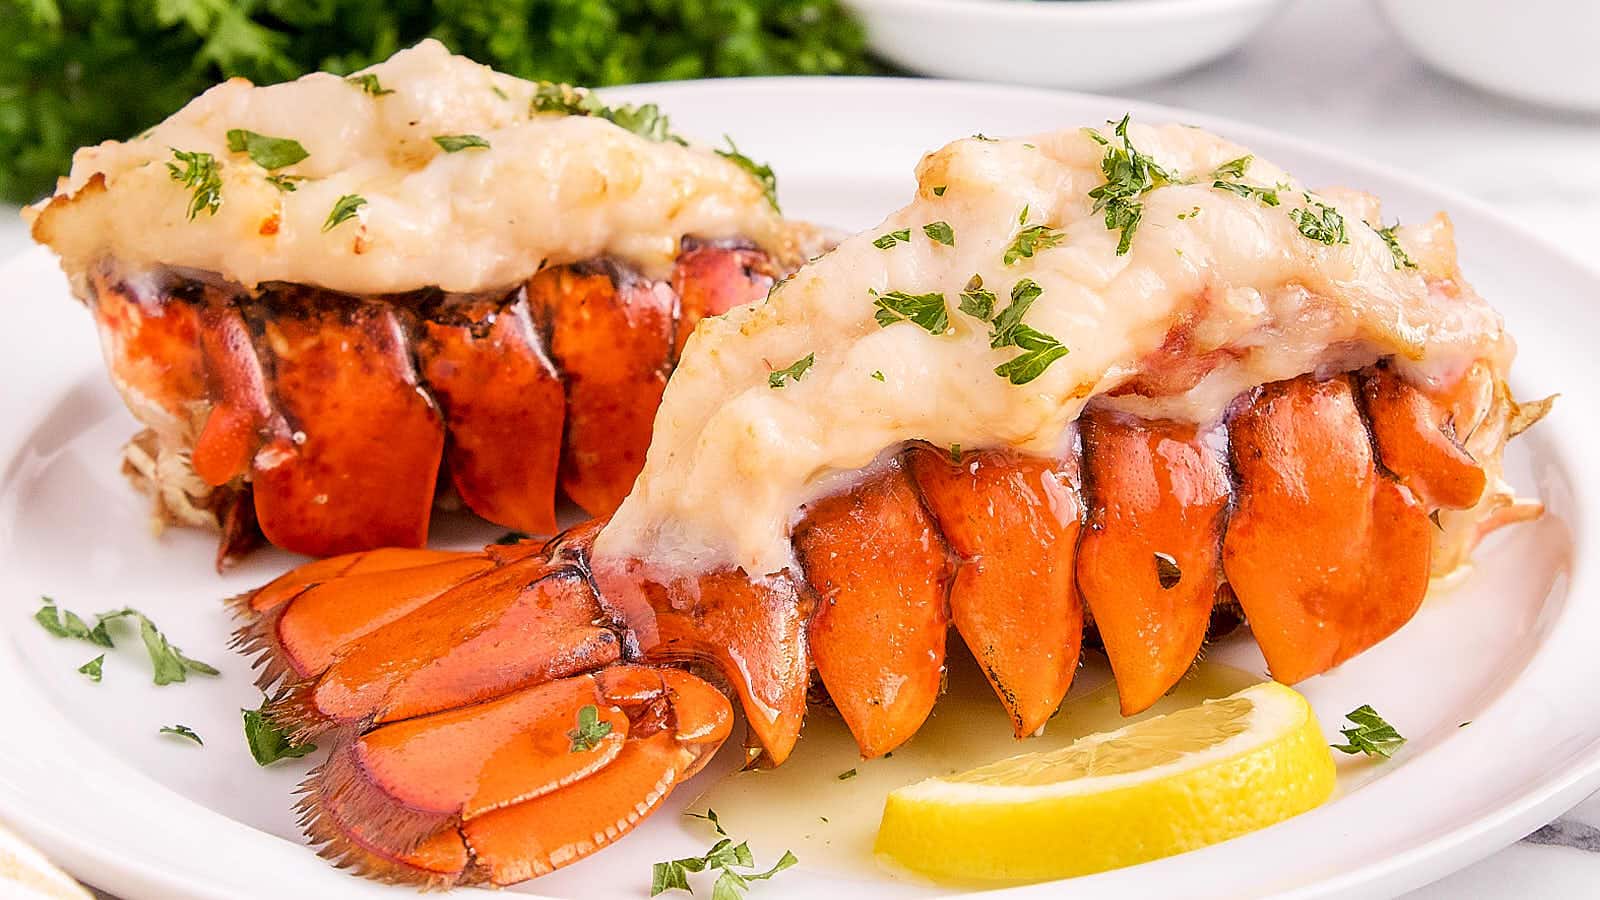 Air Fryer Lobster Tails recipe by Cheerful Cook.